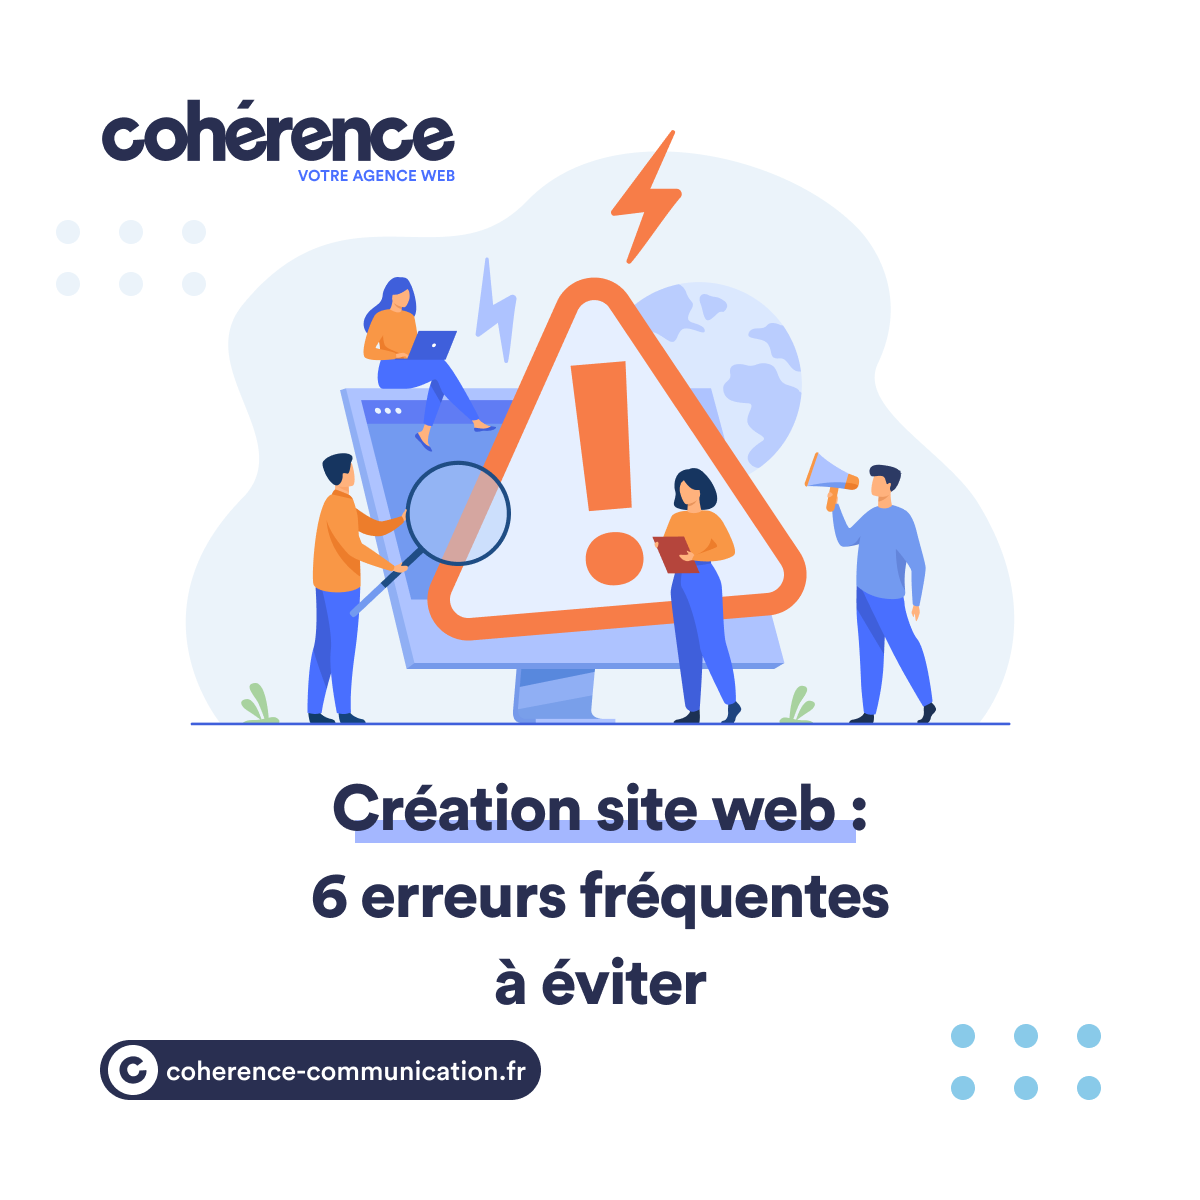 Coherence Agence Web A Rennes Creation Site Web 6 Erreurs Frequentes A Eviter